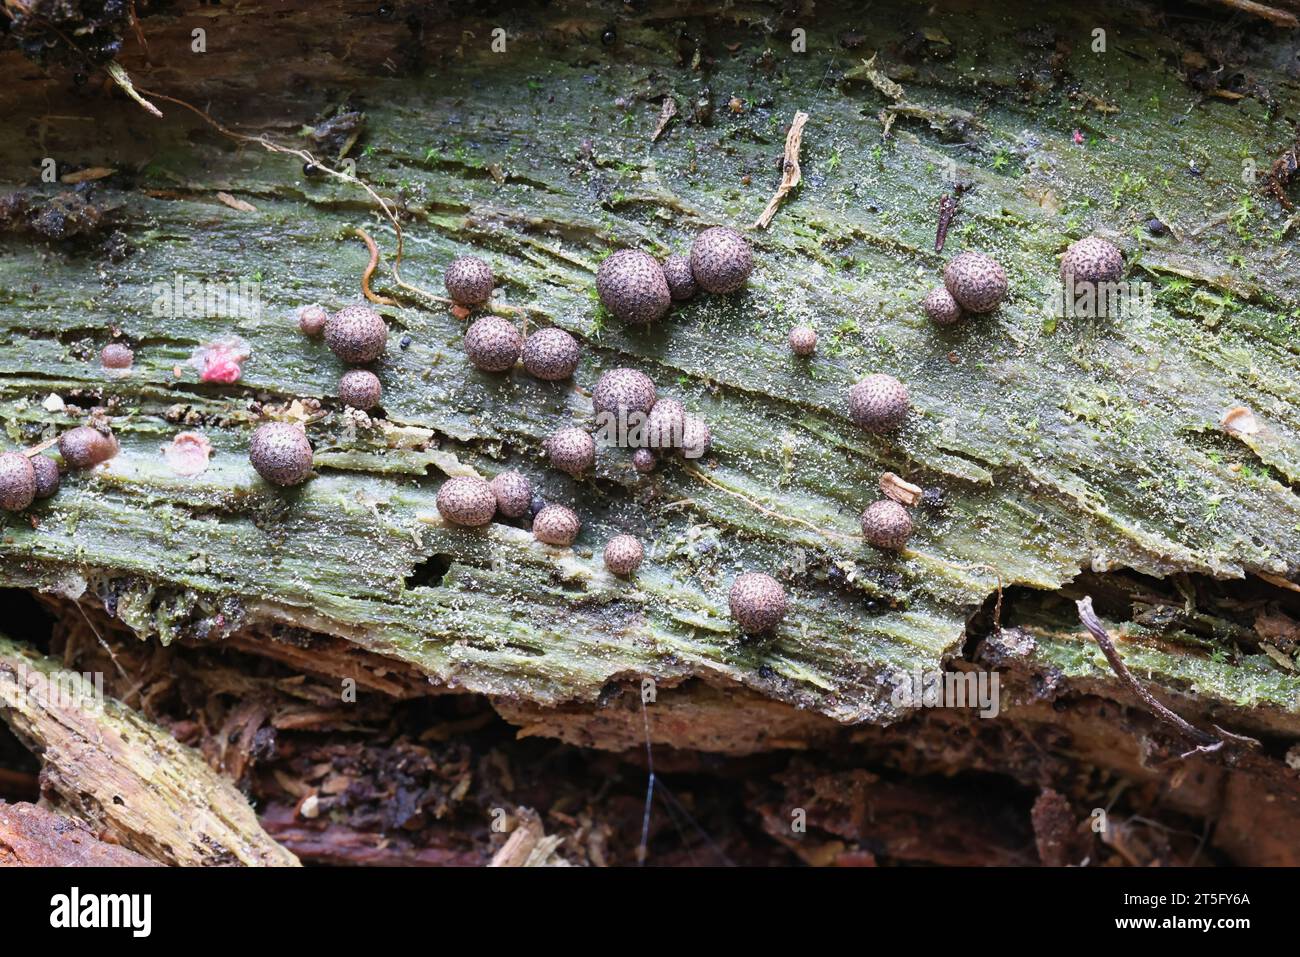 Lycogala roseosporum, a species of wolf's milk, slime mold from Finland Stock Photo